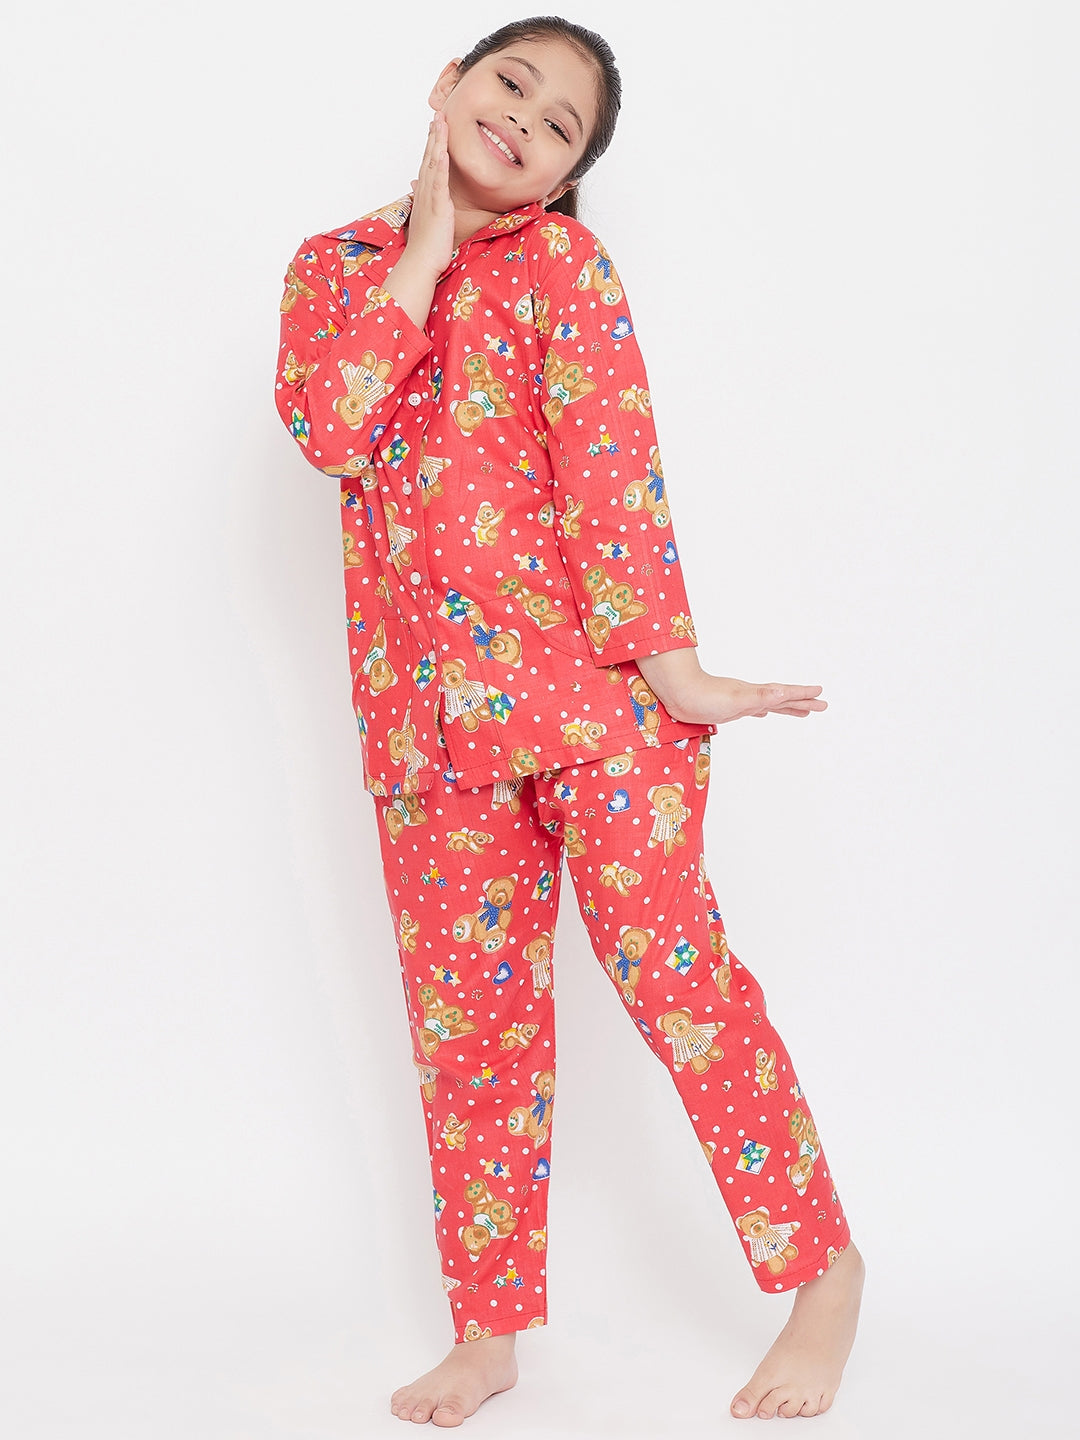 Girl's Red & Blue Printed Rayon Nightsuit (Pack of 2) - NOZ2TOZ KIDS